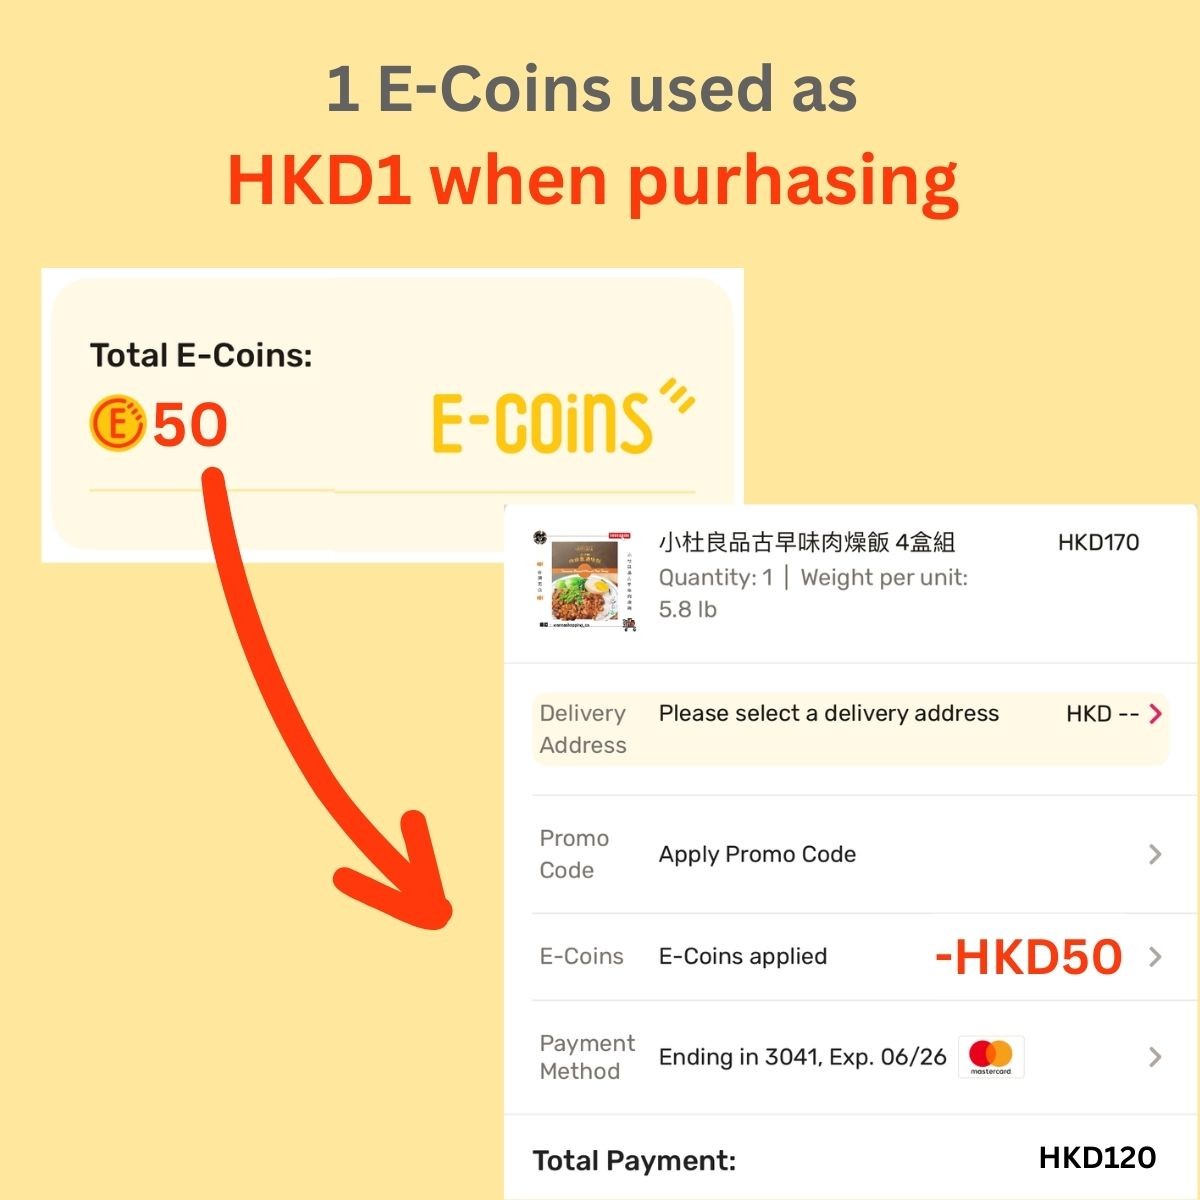 E-Coins Usage and Terms